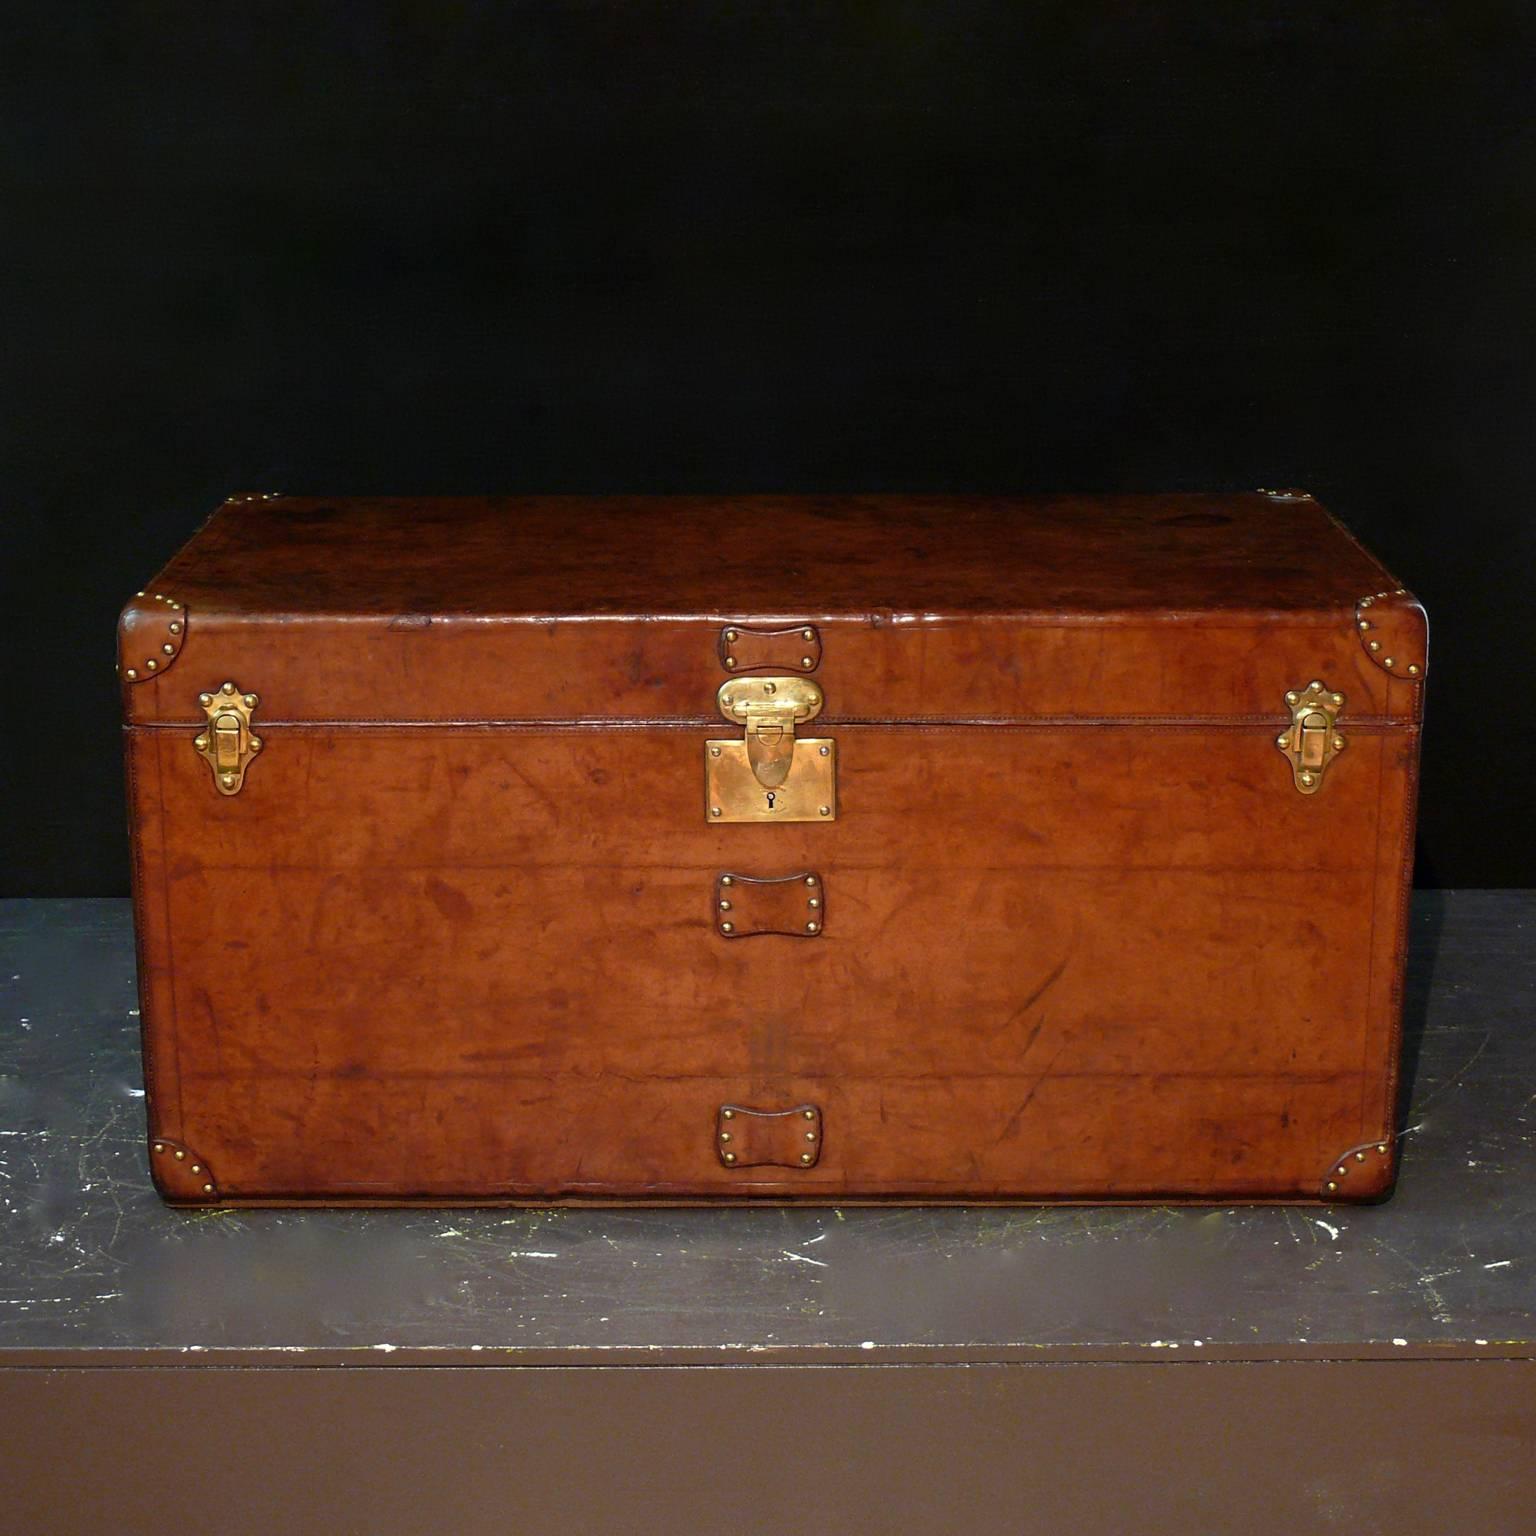 An exceptional Goyard leather steamer trunk with original cotton lined interior and brass catches and lock; circa 1910. Its particularly rare to find all-leather Goyard trunks and the quality of this example is superb.
Louis Vuitton and Goyard were